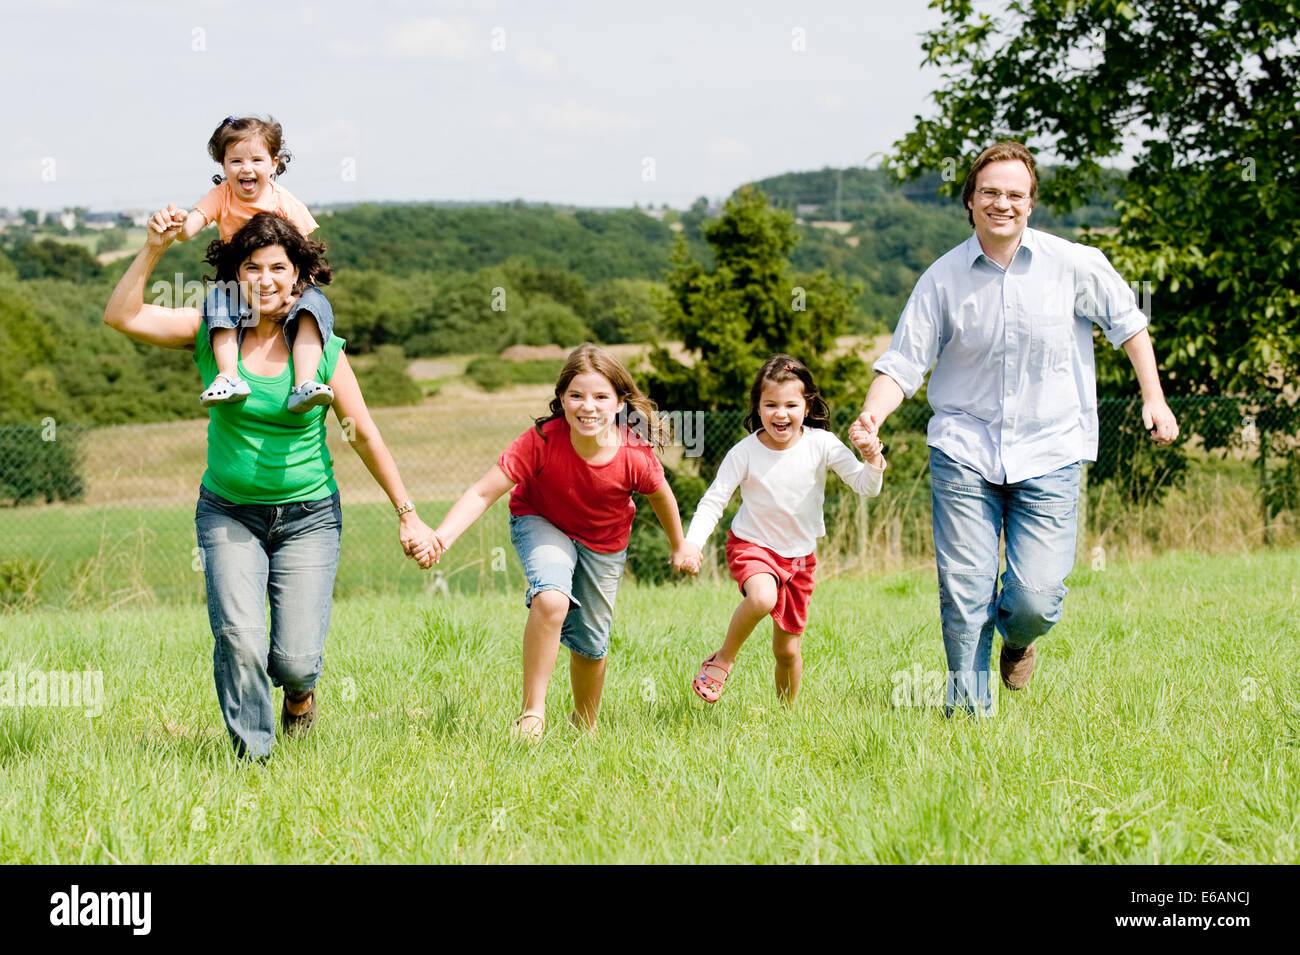 happy,togetherness,family,family outing Stock Photo